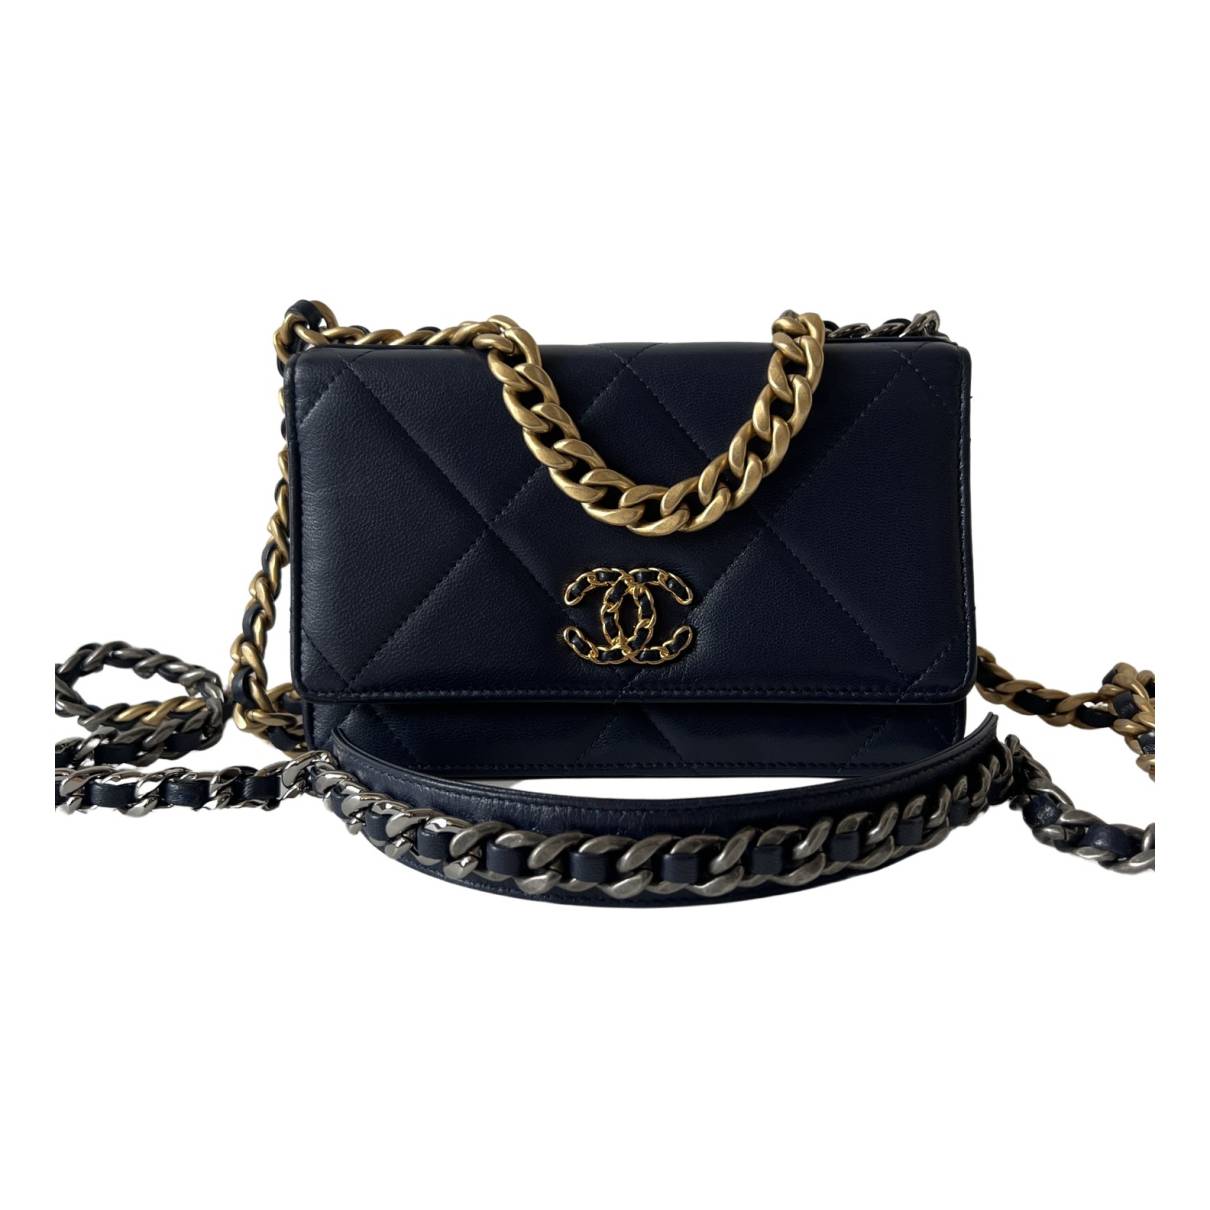 Wallet on chain chanel 19 leather handbag Chanel Navy in Leather